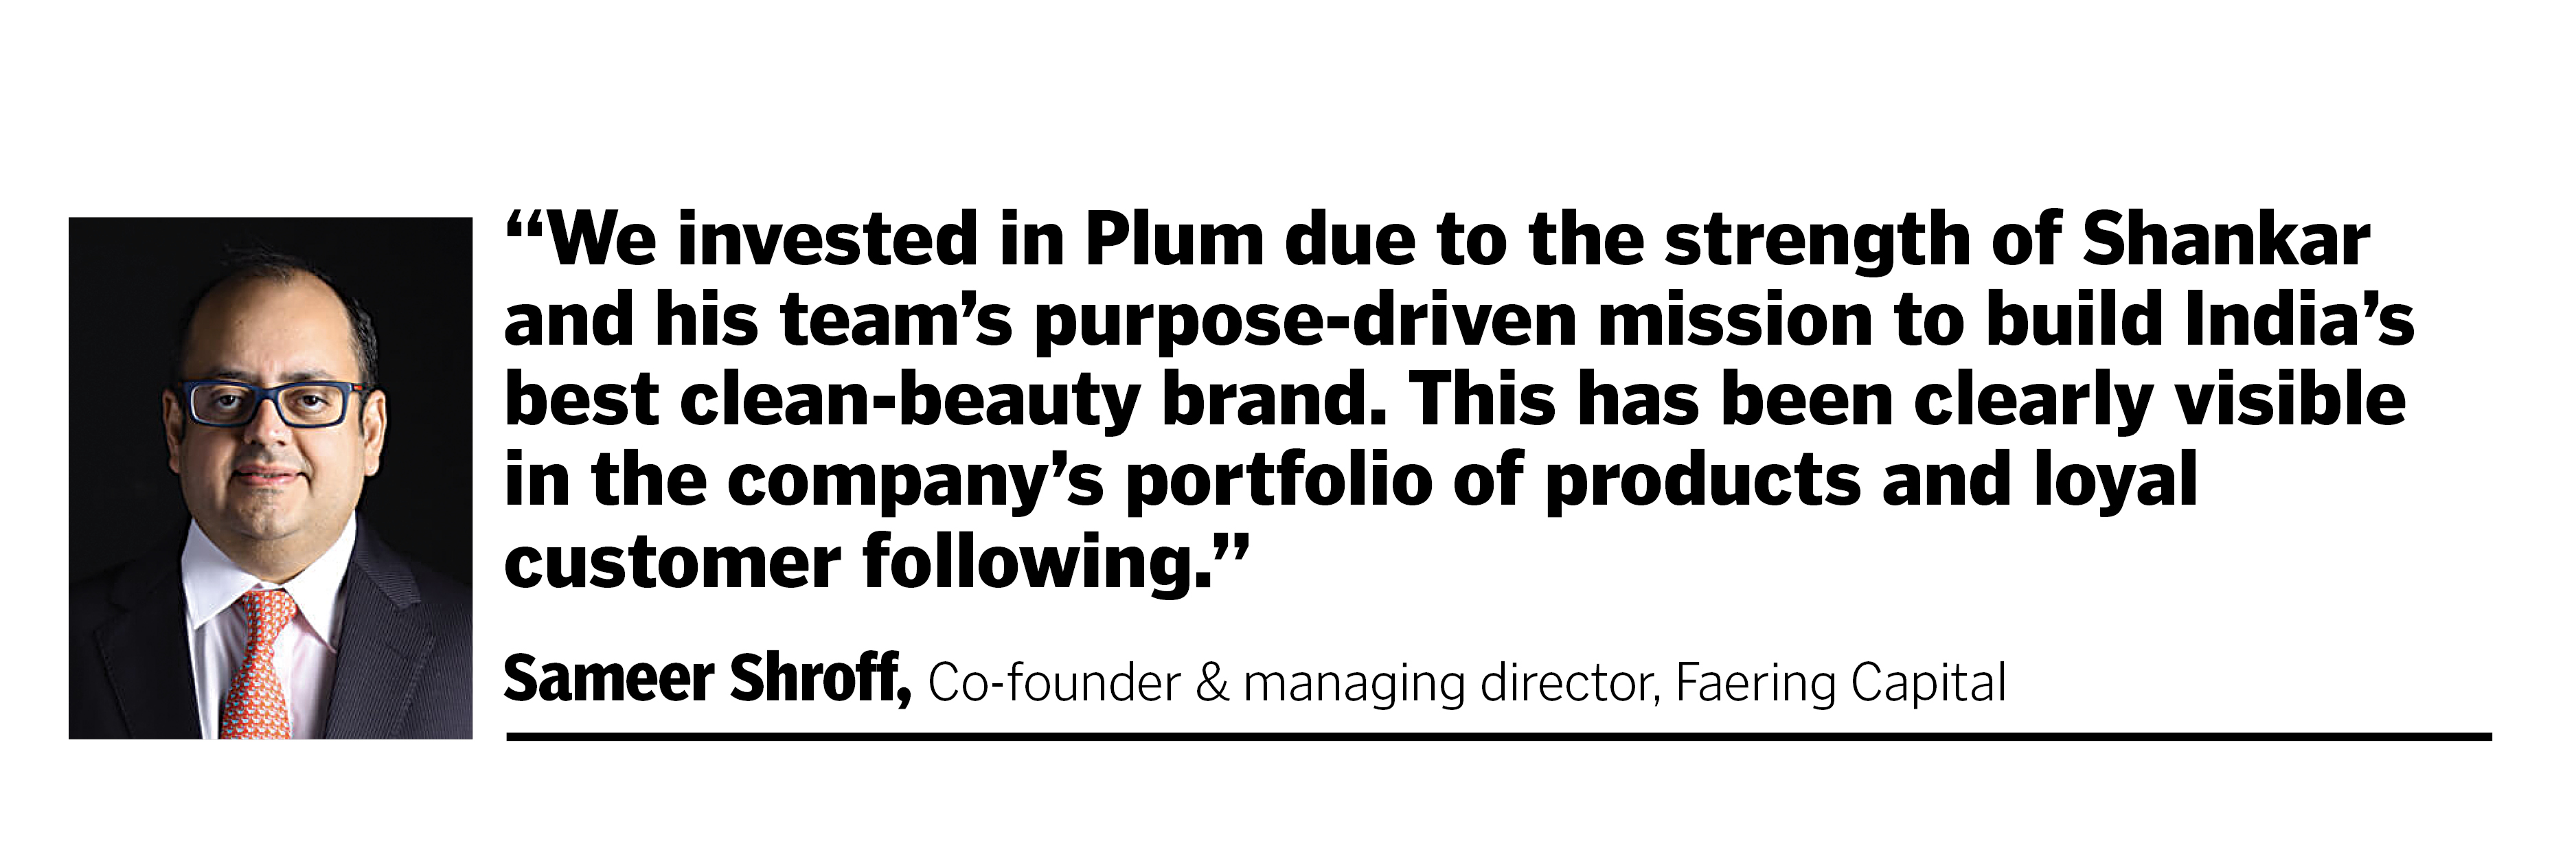 Plum: On a mission to make positive impact with vegan beauty